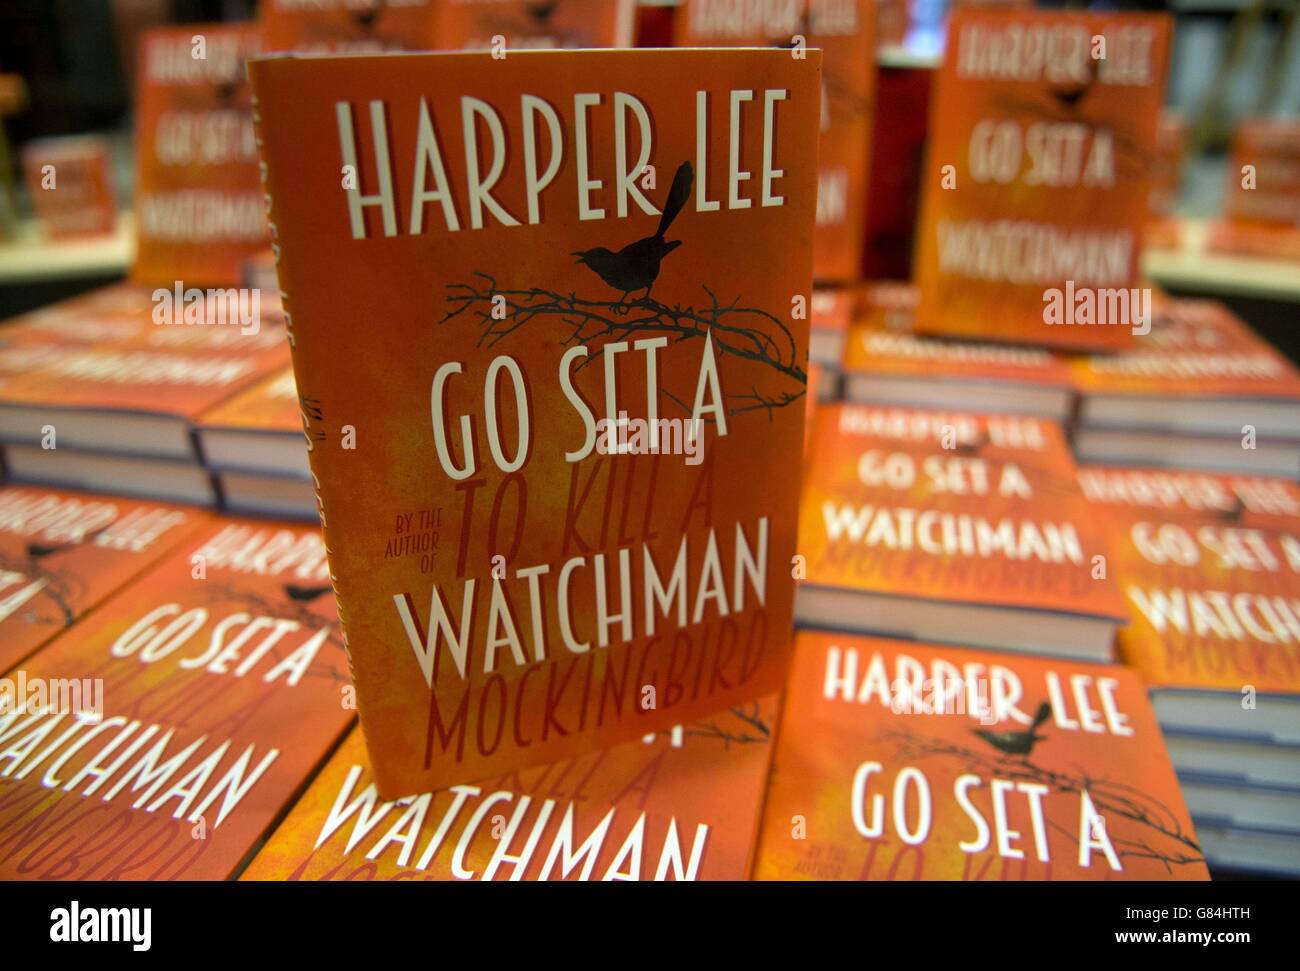 The launch of Harper Lee's novel 'Go Set A Watchman' at Waterstones on Piccadilly, London. Stock Photo